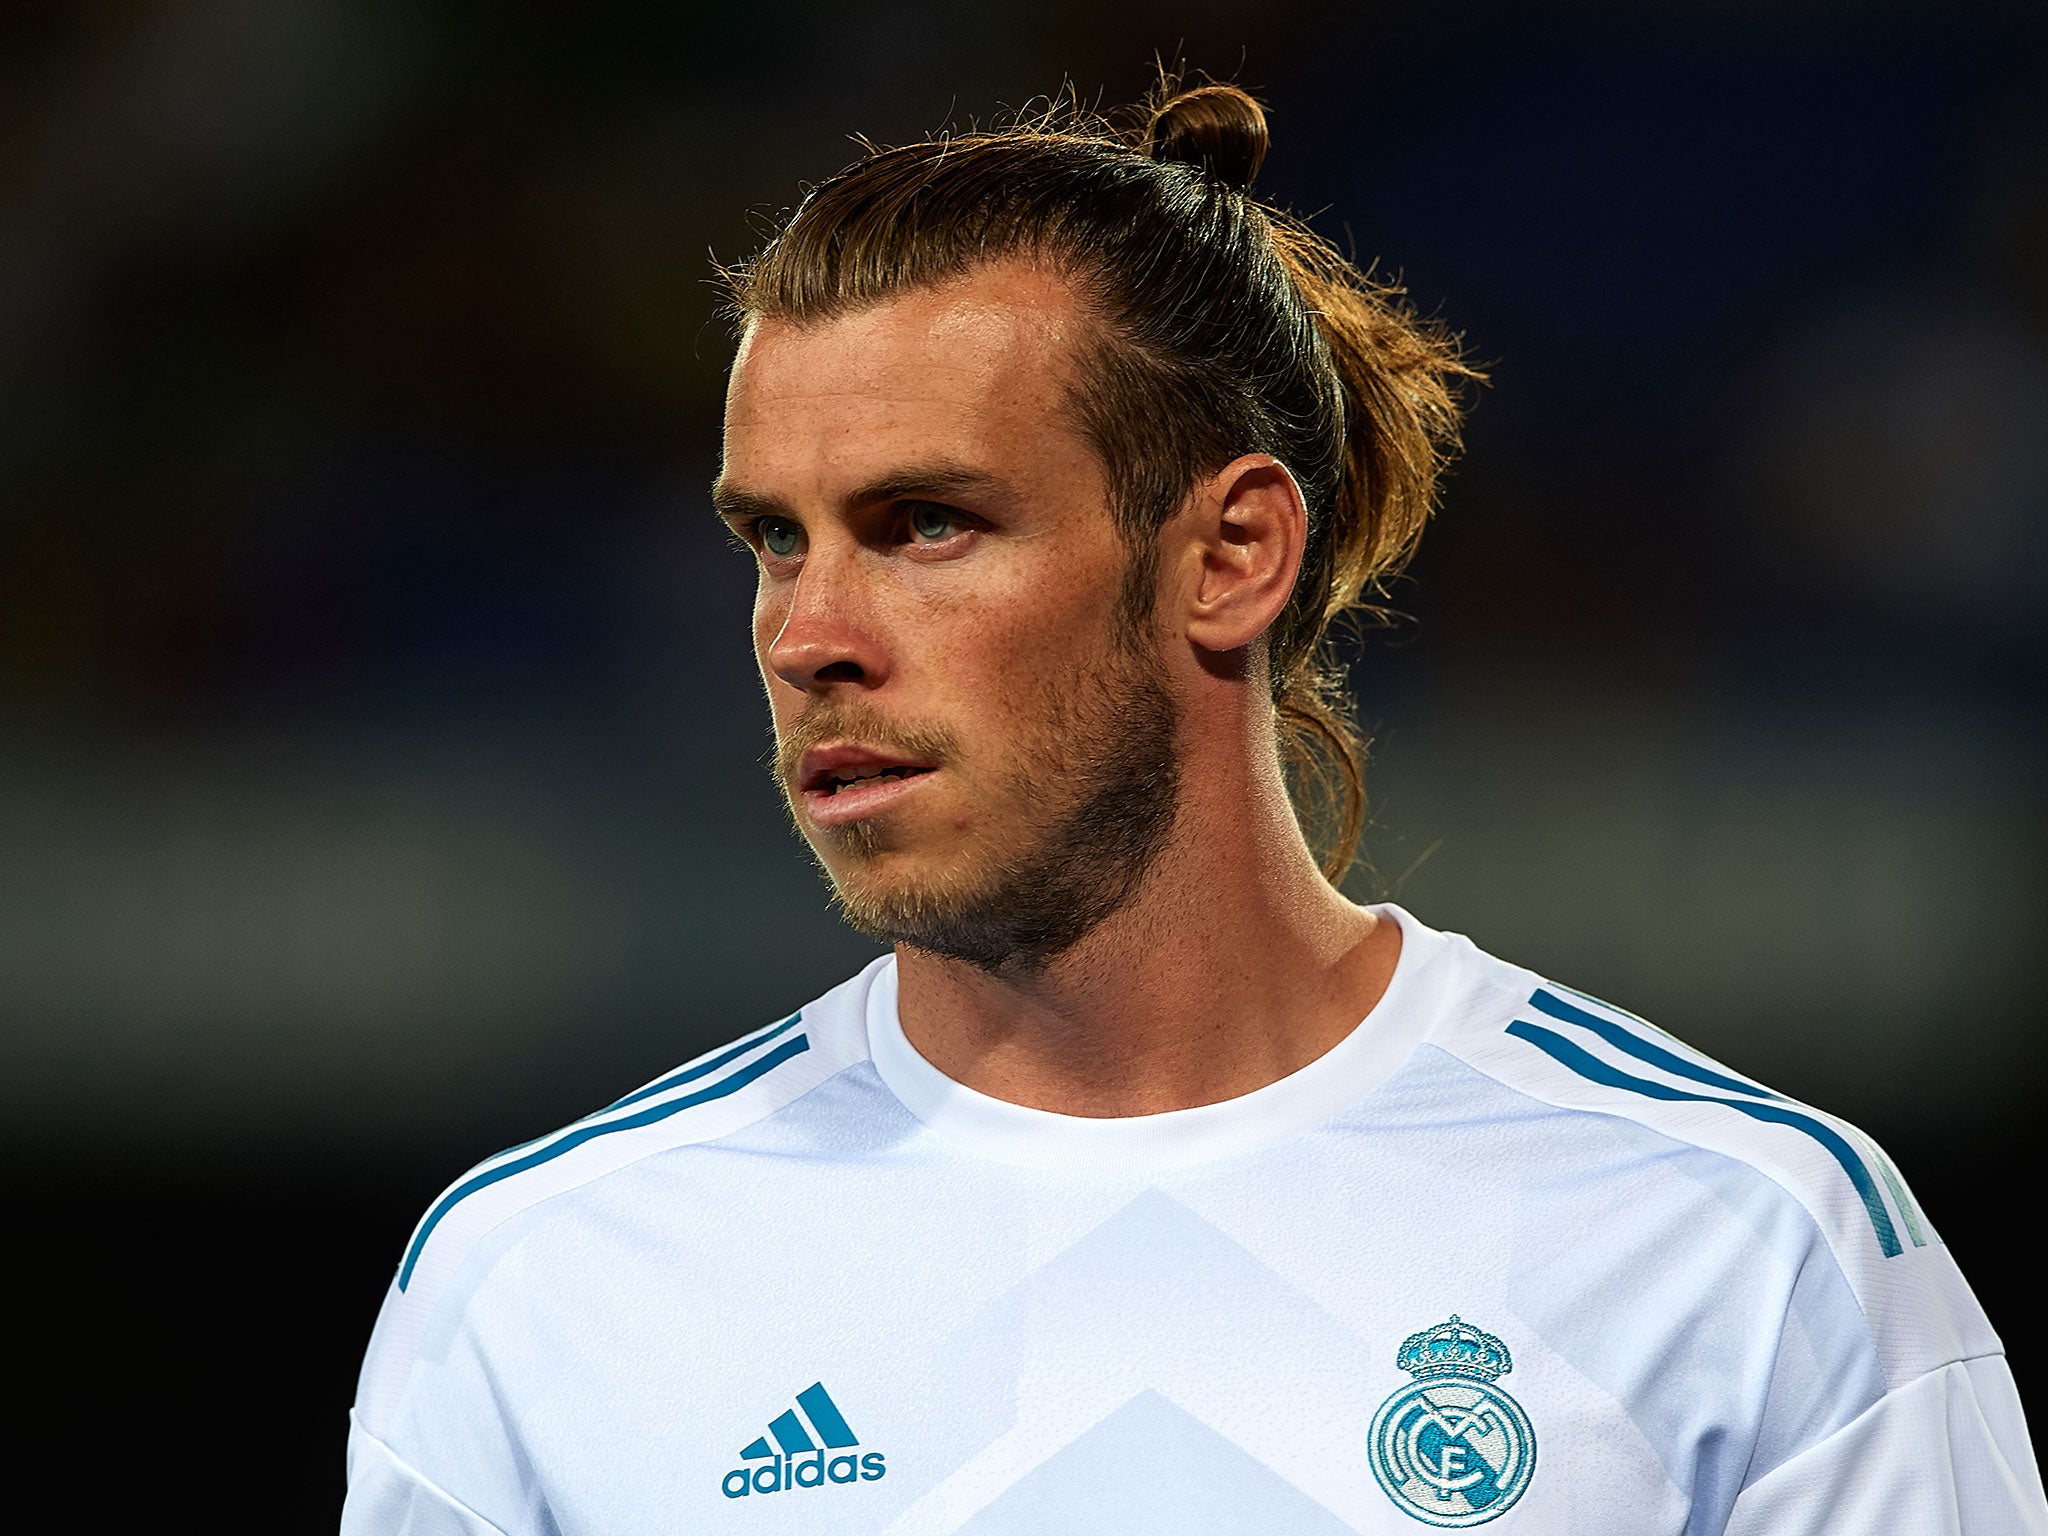 Gareth Bale is nearing a return to first-team action